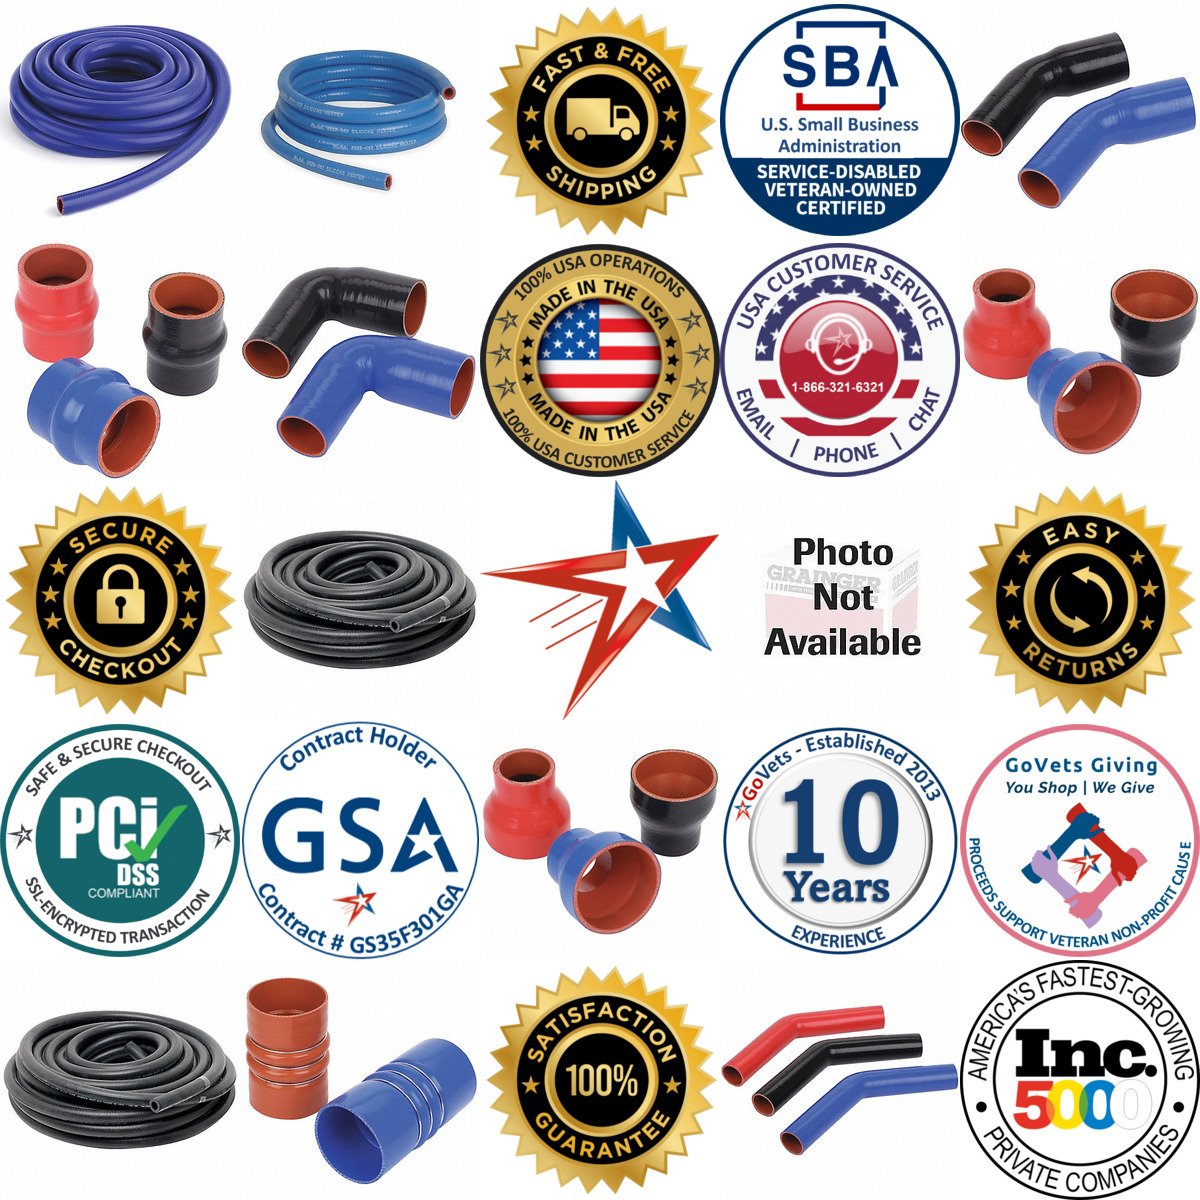 A selection of Heater Hoses products on GoVets